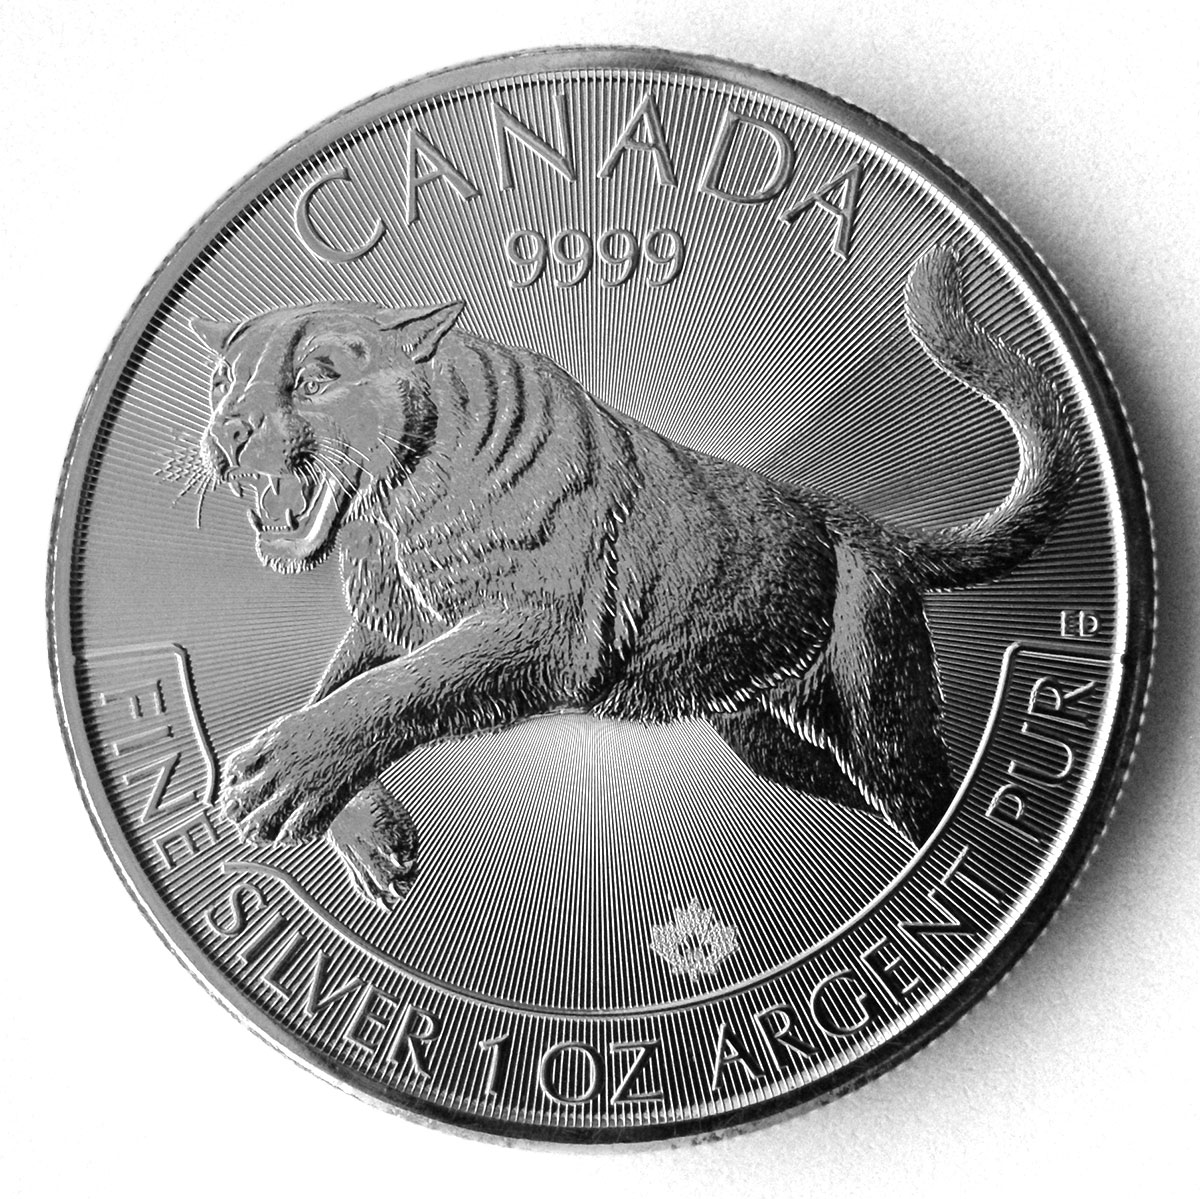 Bullion coin designed by Emily S. Damstra